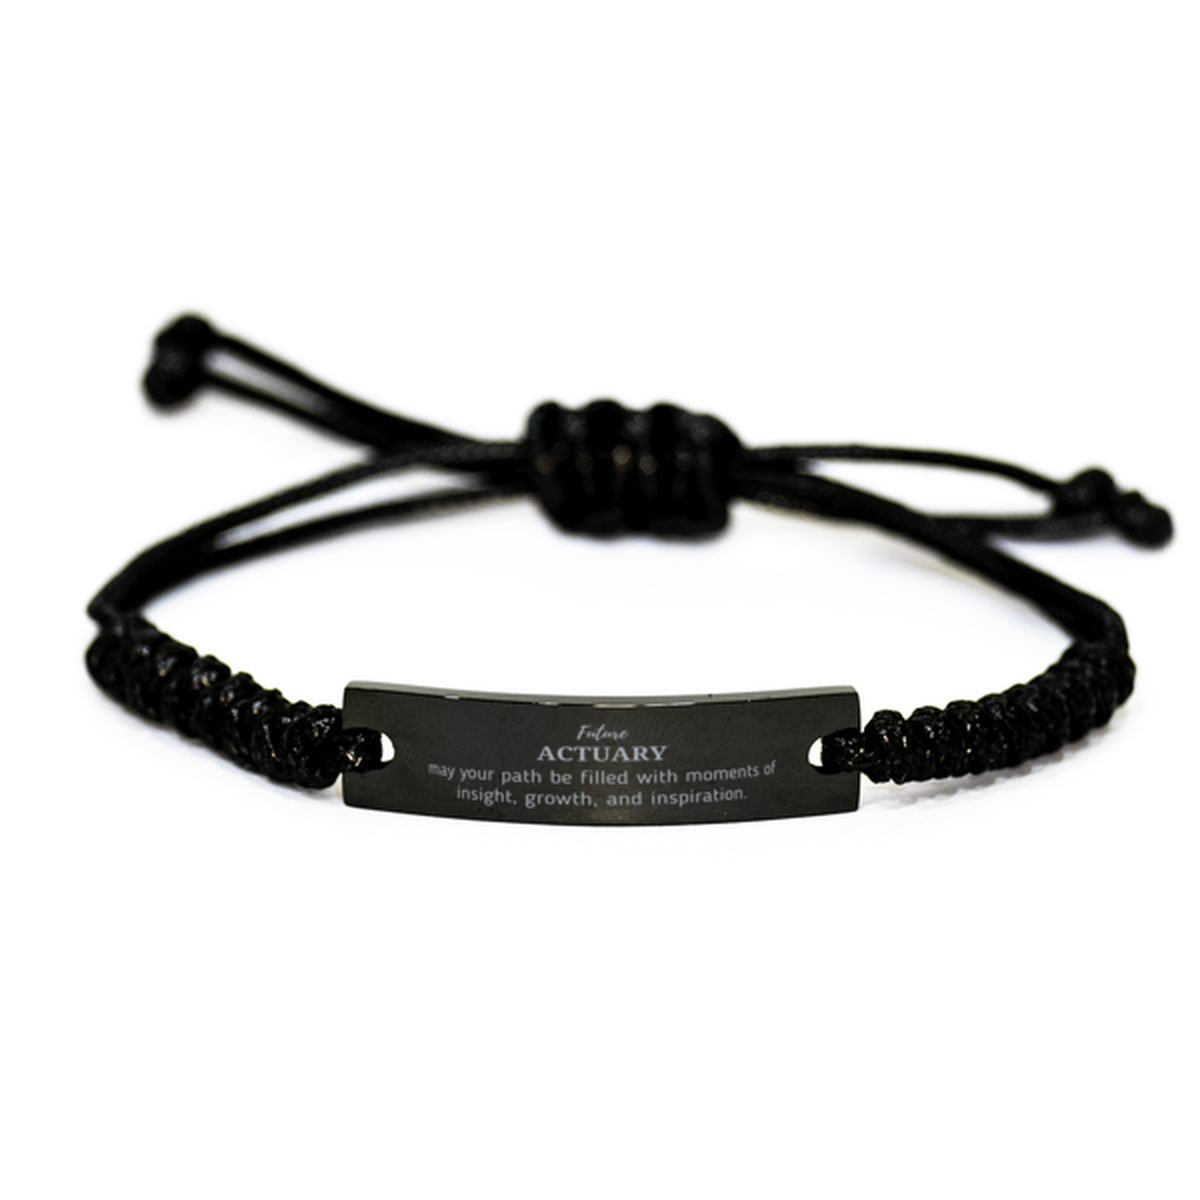 Future Actuary Gifts, May your path be filled with moments of insight, Graduation Gifts for New Actuary, Christmas Unique Black Rope Bracelet For Men, Women, Friends